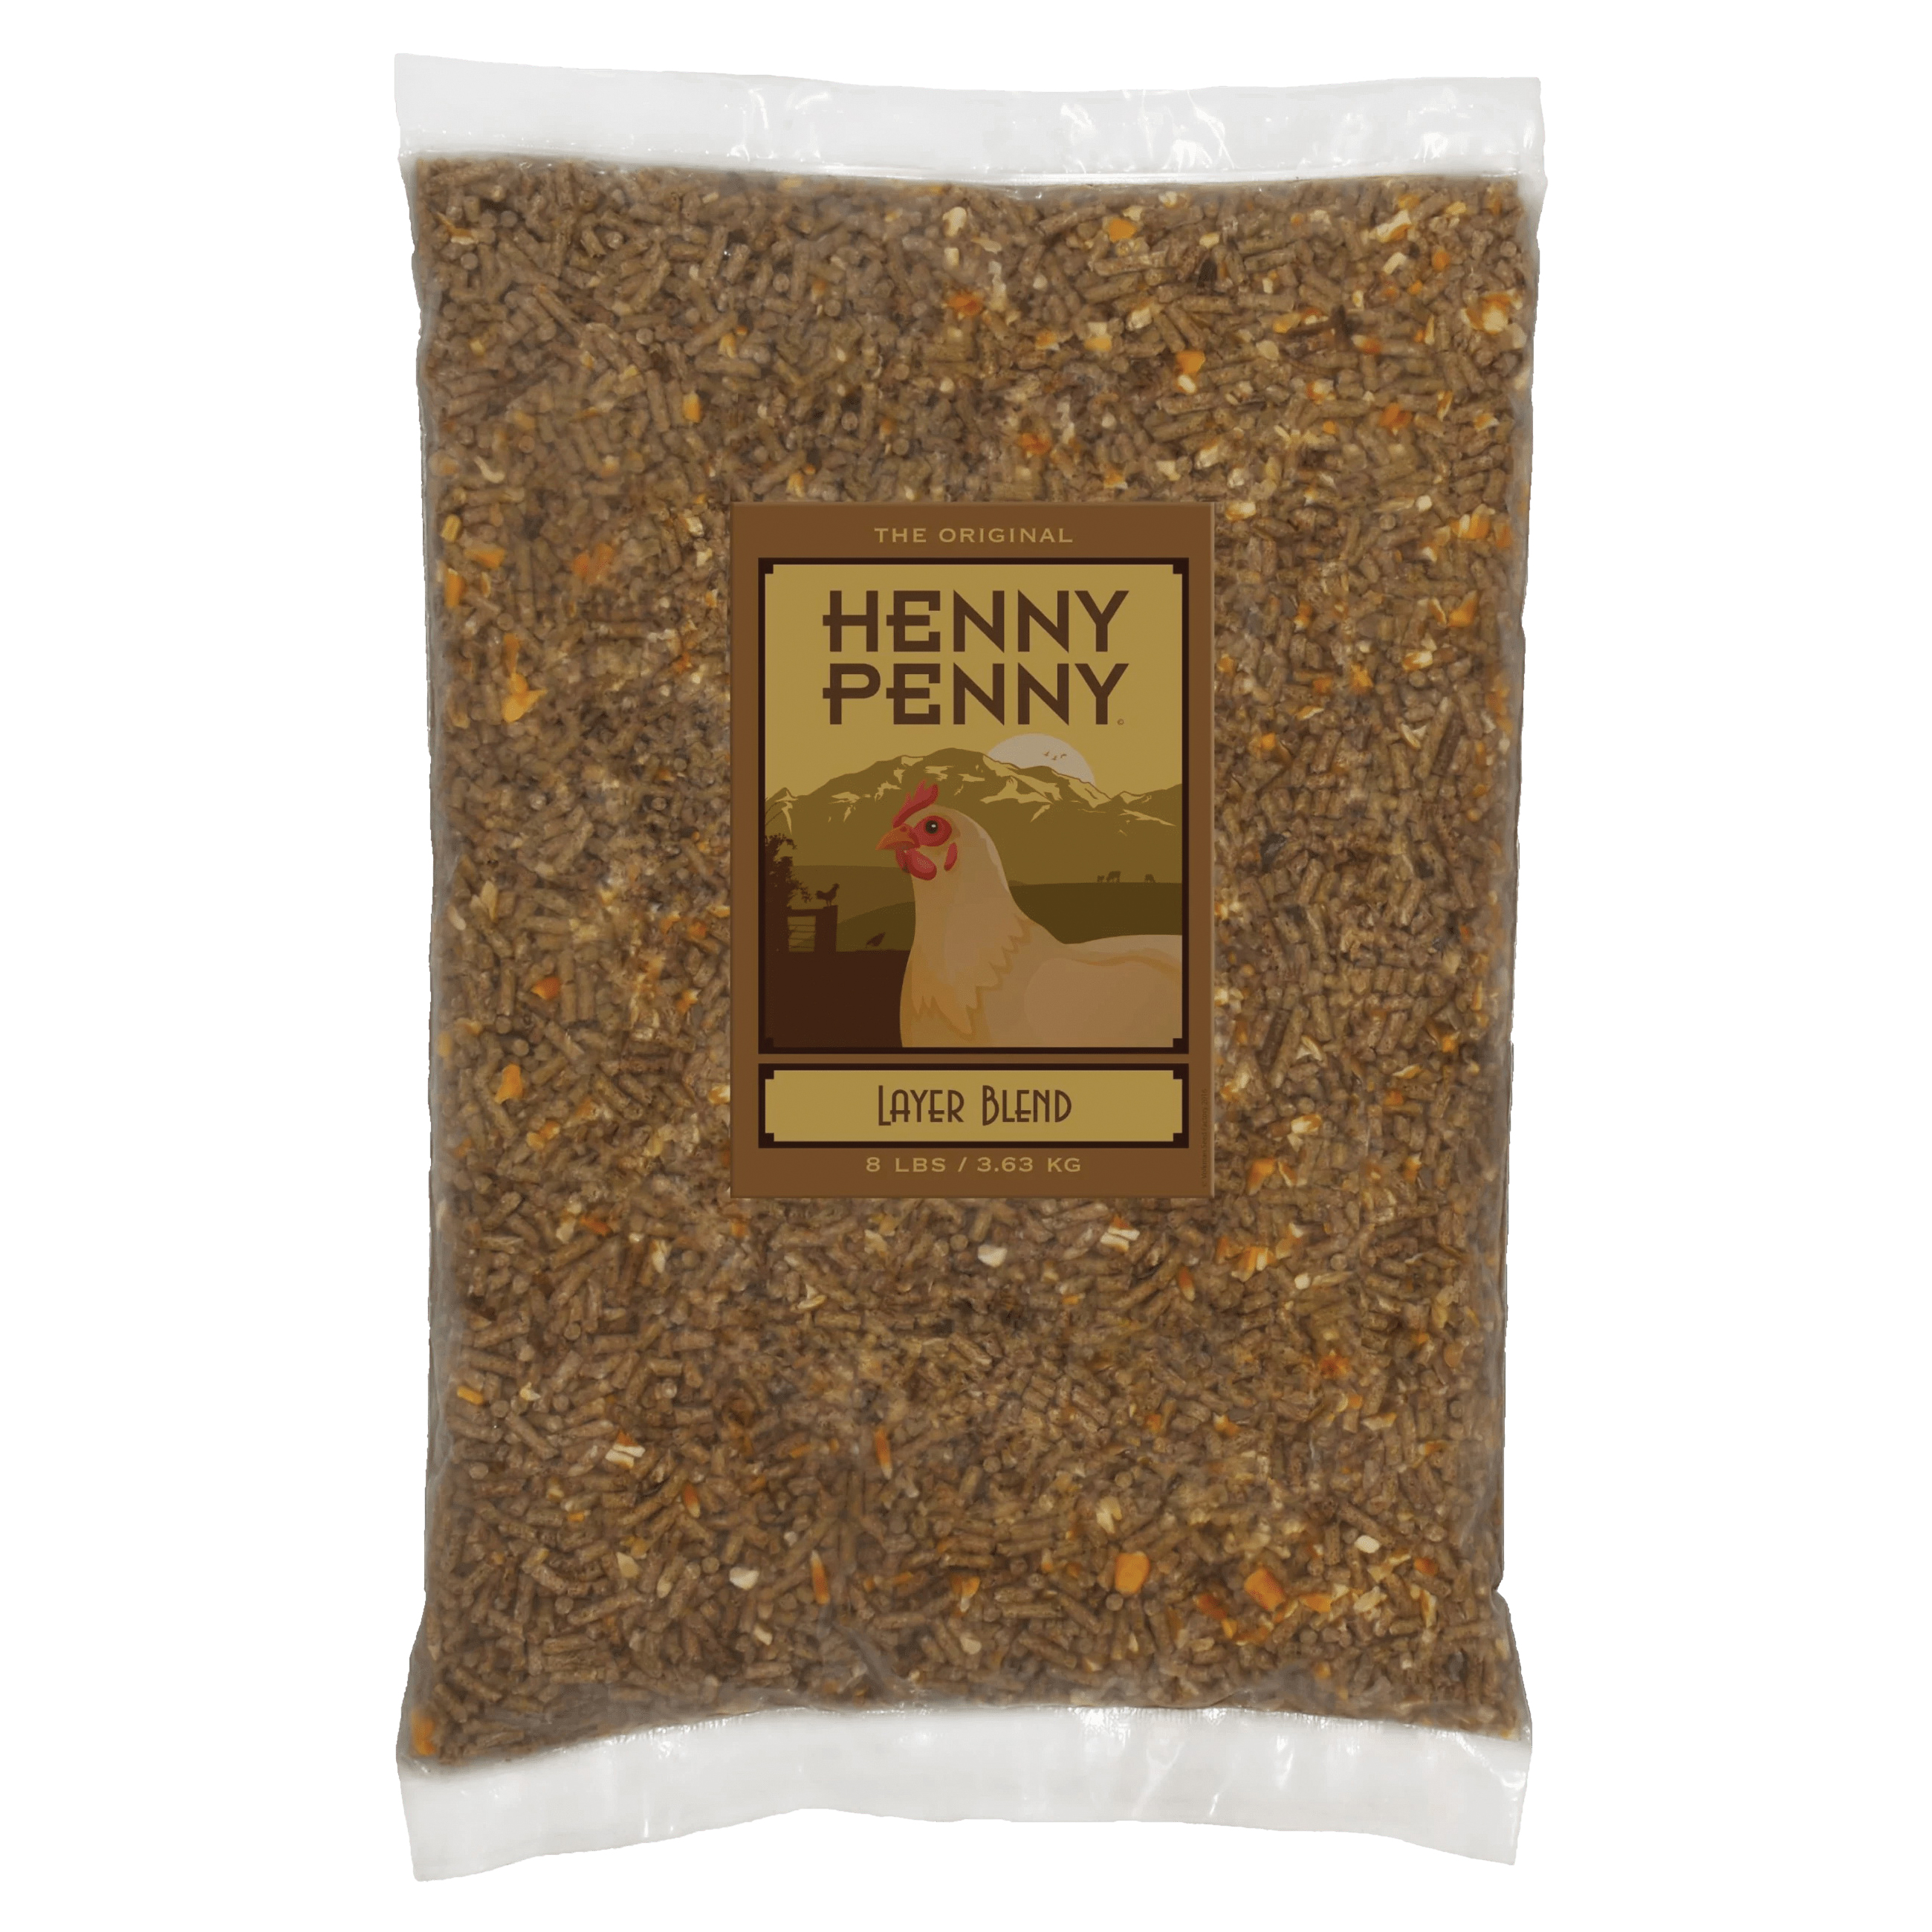 HENNY PENNY 82208 Layer Blend Chicken Feed, 8 lb, Bag - 1